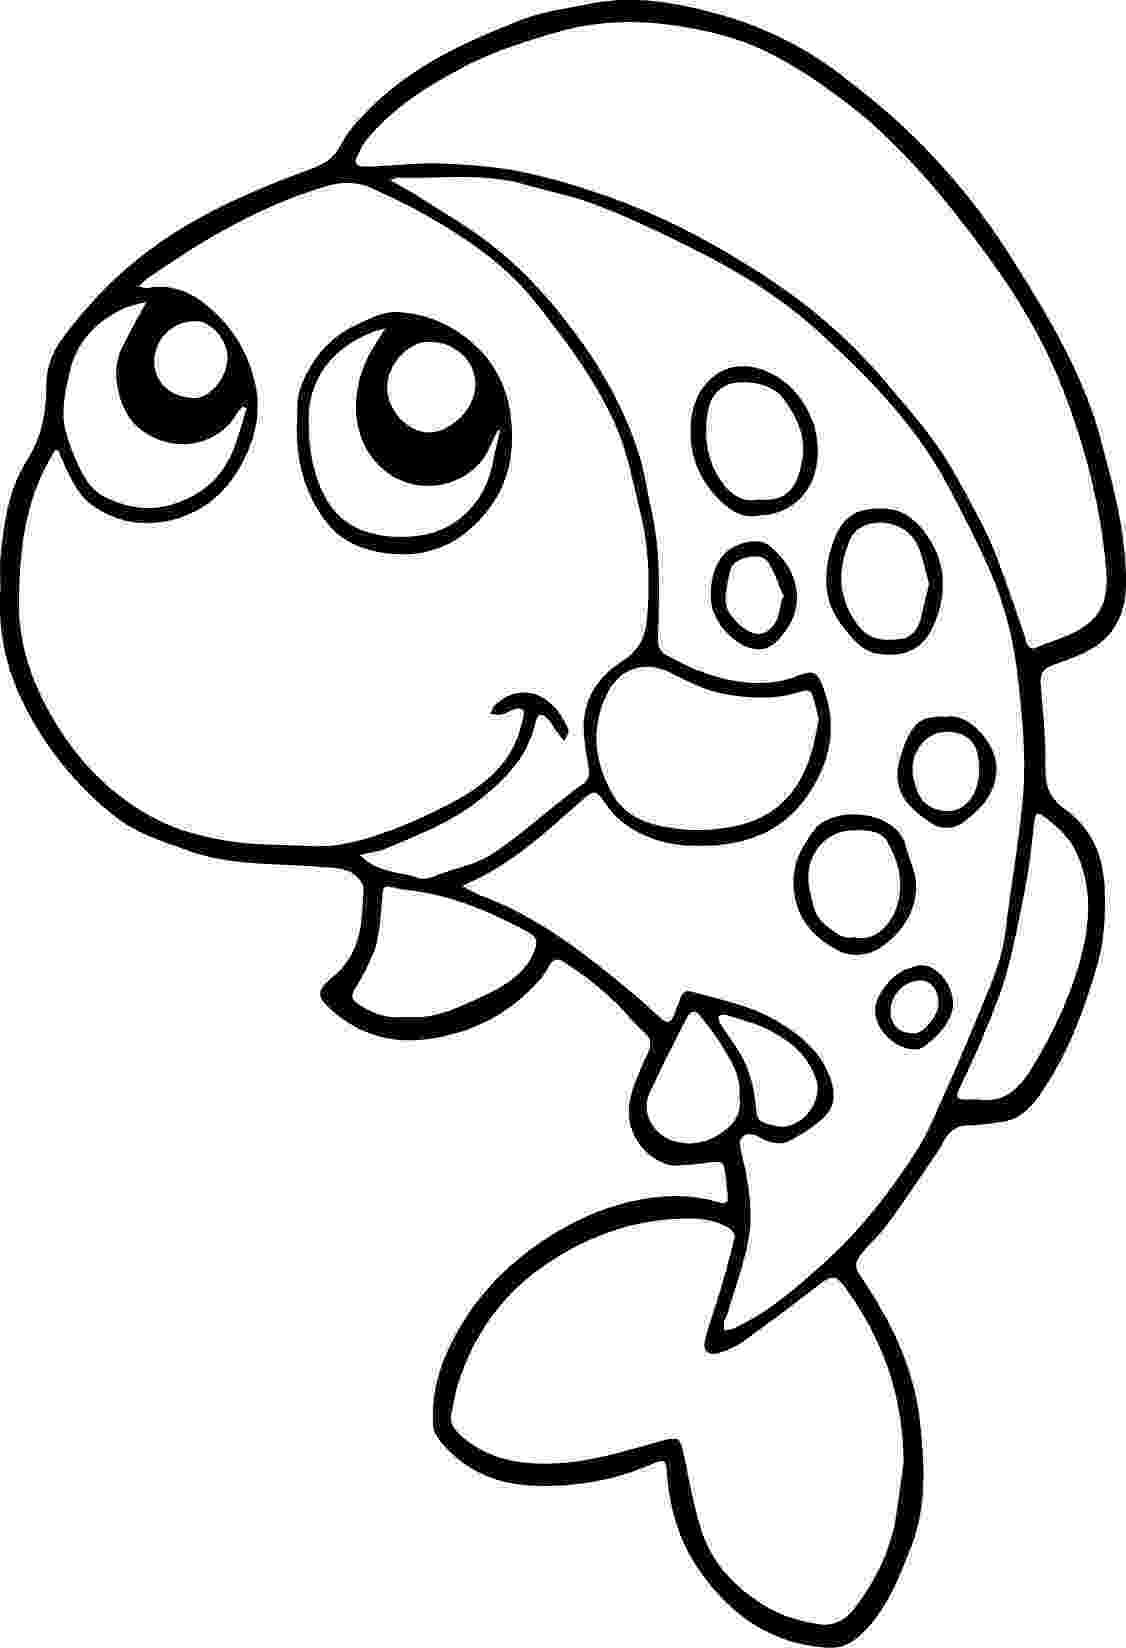 printable pictures of fish fish coloring pages for kids preschool and kindergarten printable of fish pictures 